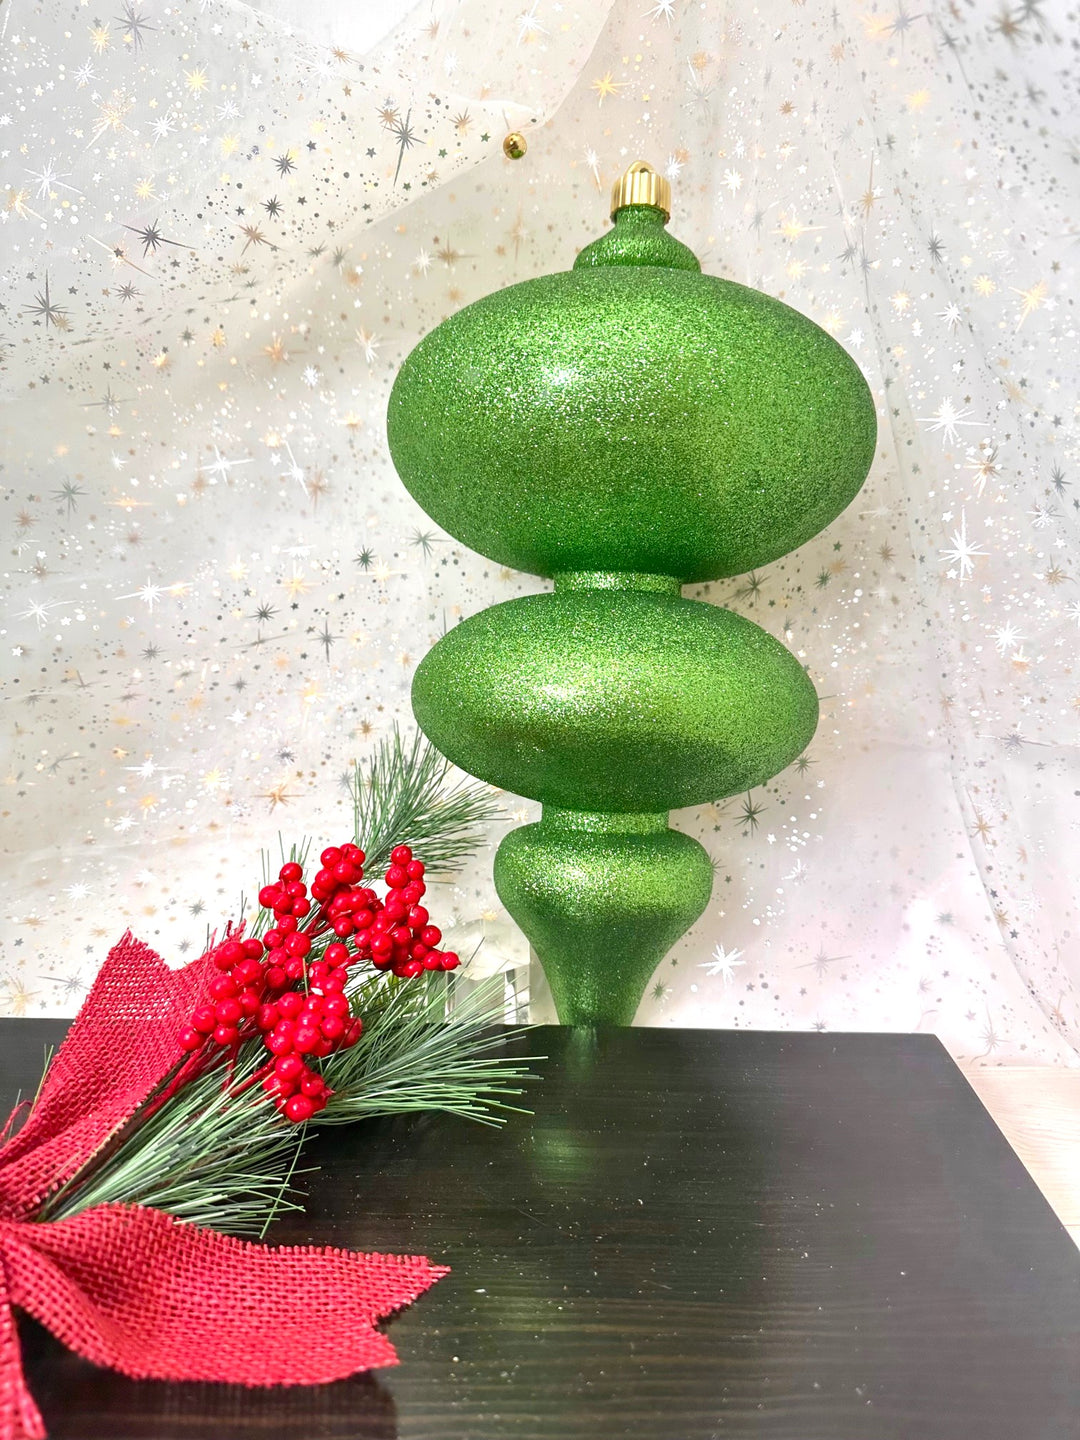 15" (380mm) Giant Commercial Shatterproof Finials, Lime Glitter, Case, 4 Pieces